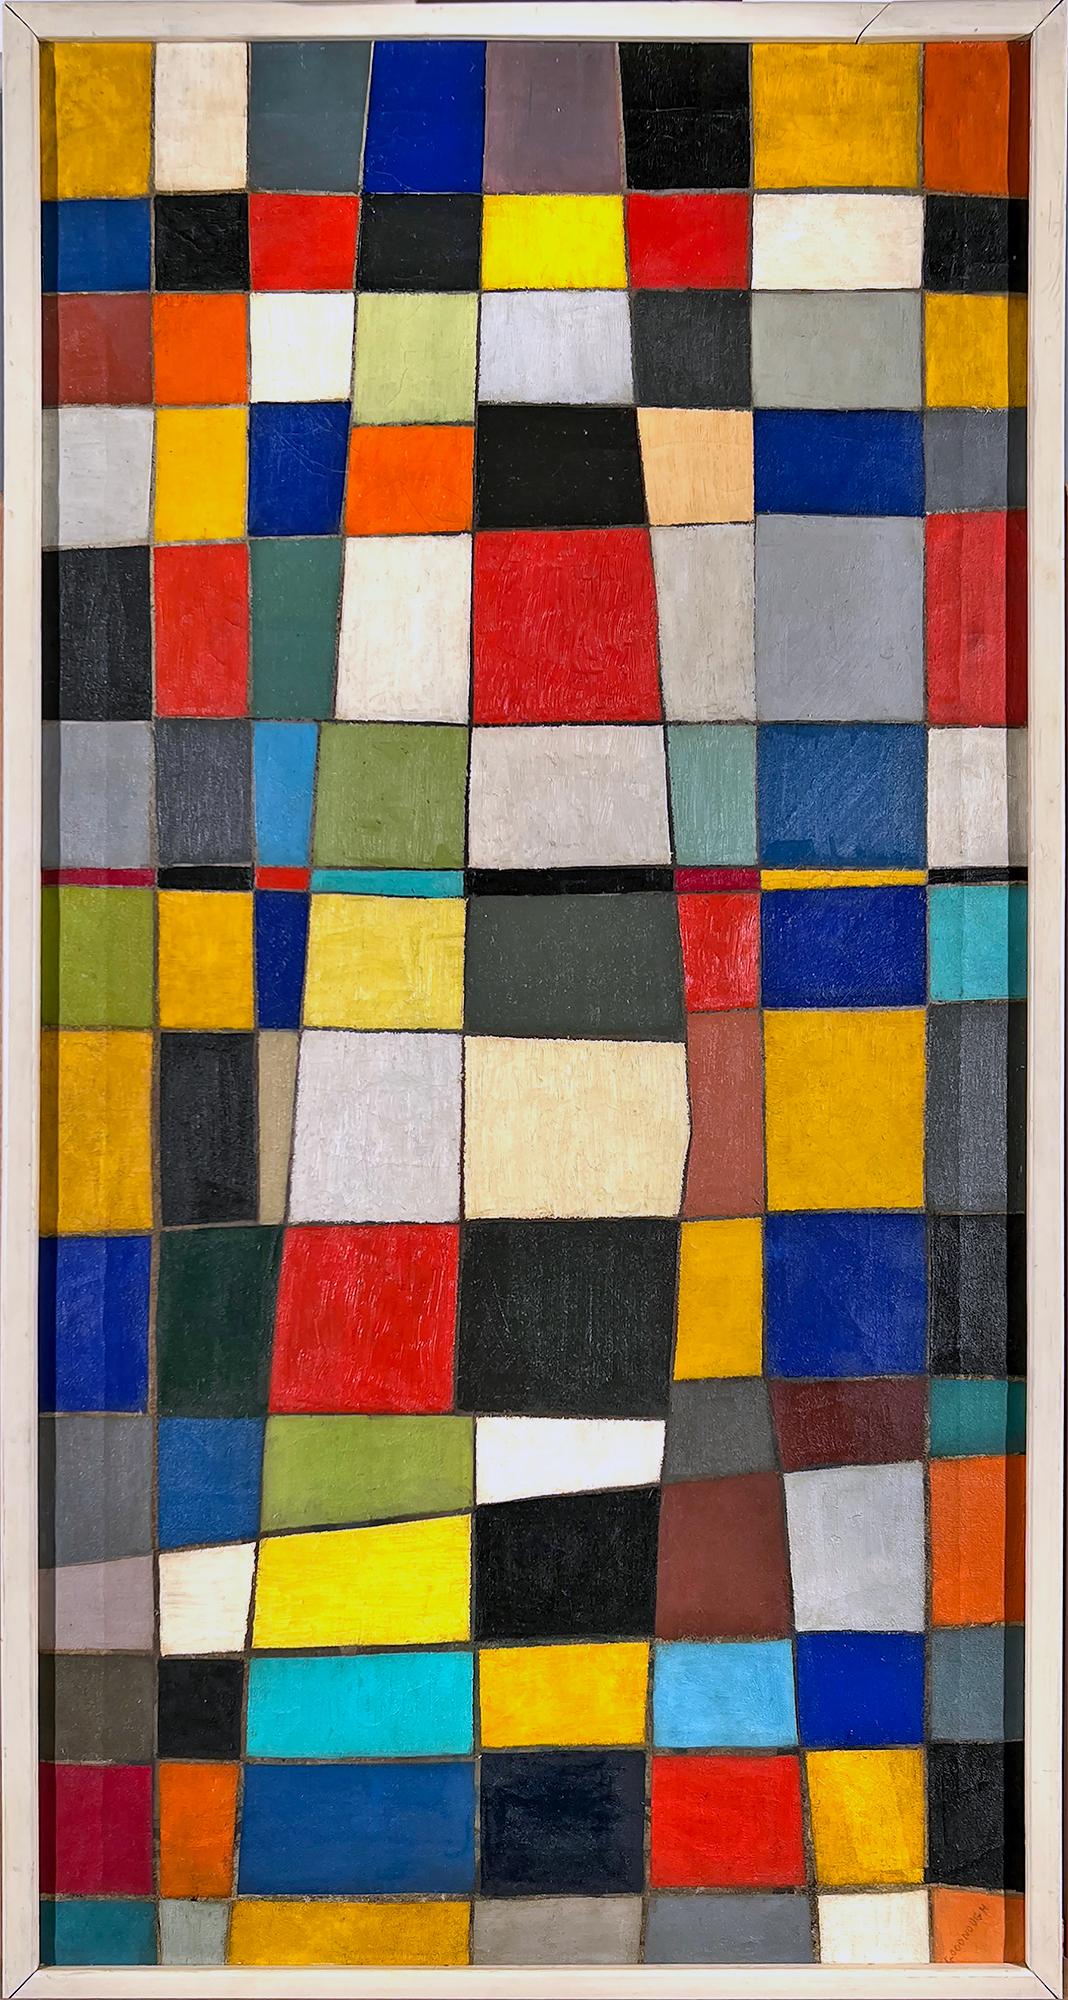 Squares - Color Field Painting - like Mondrian